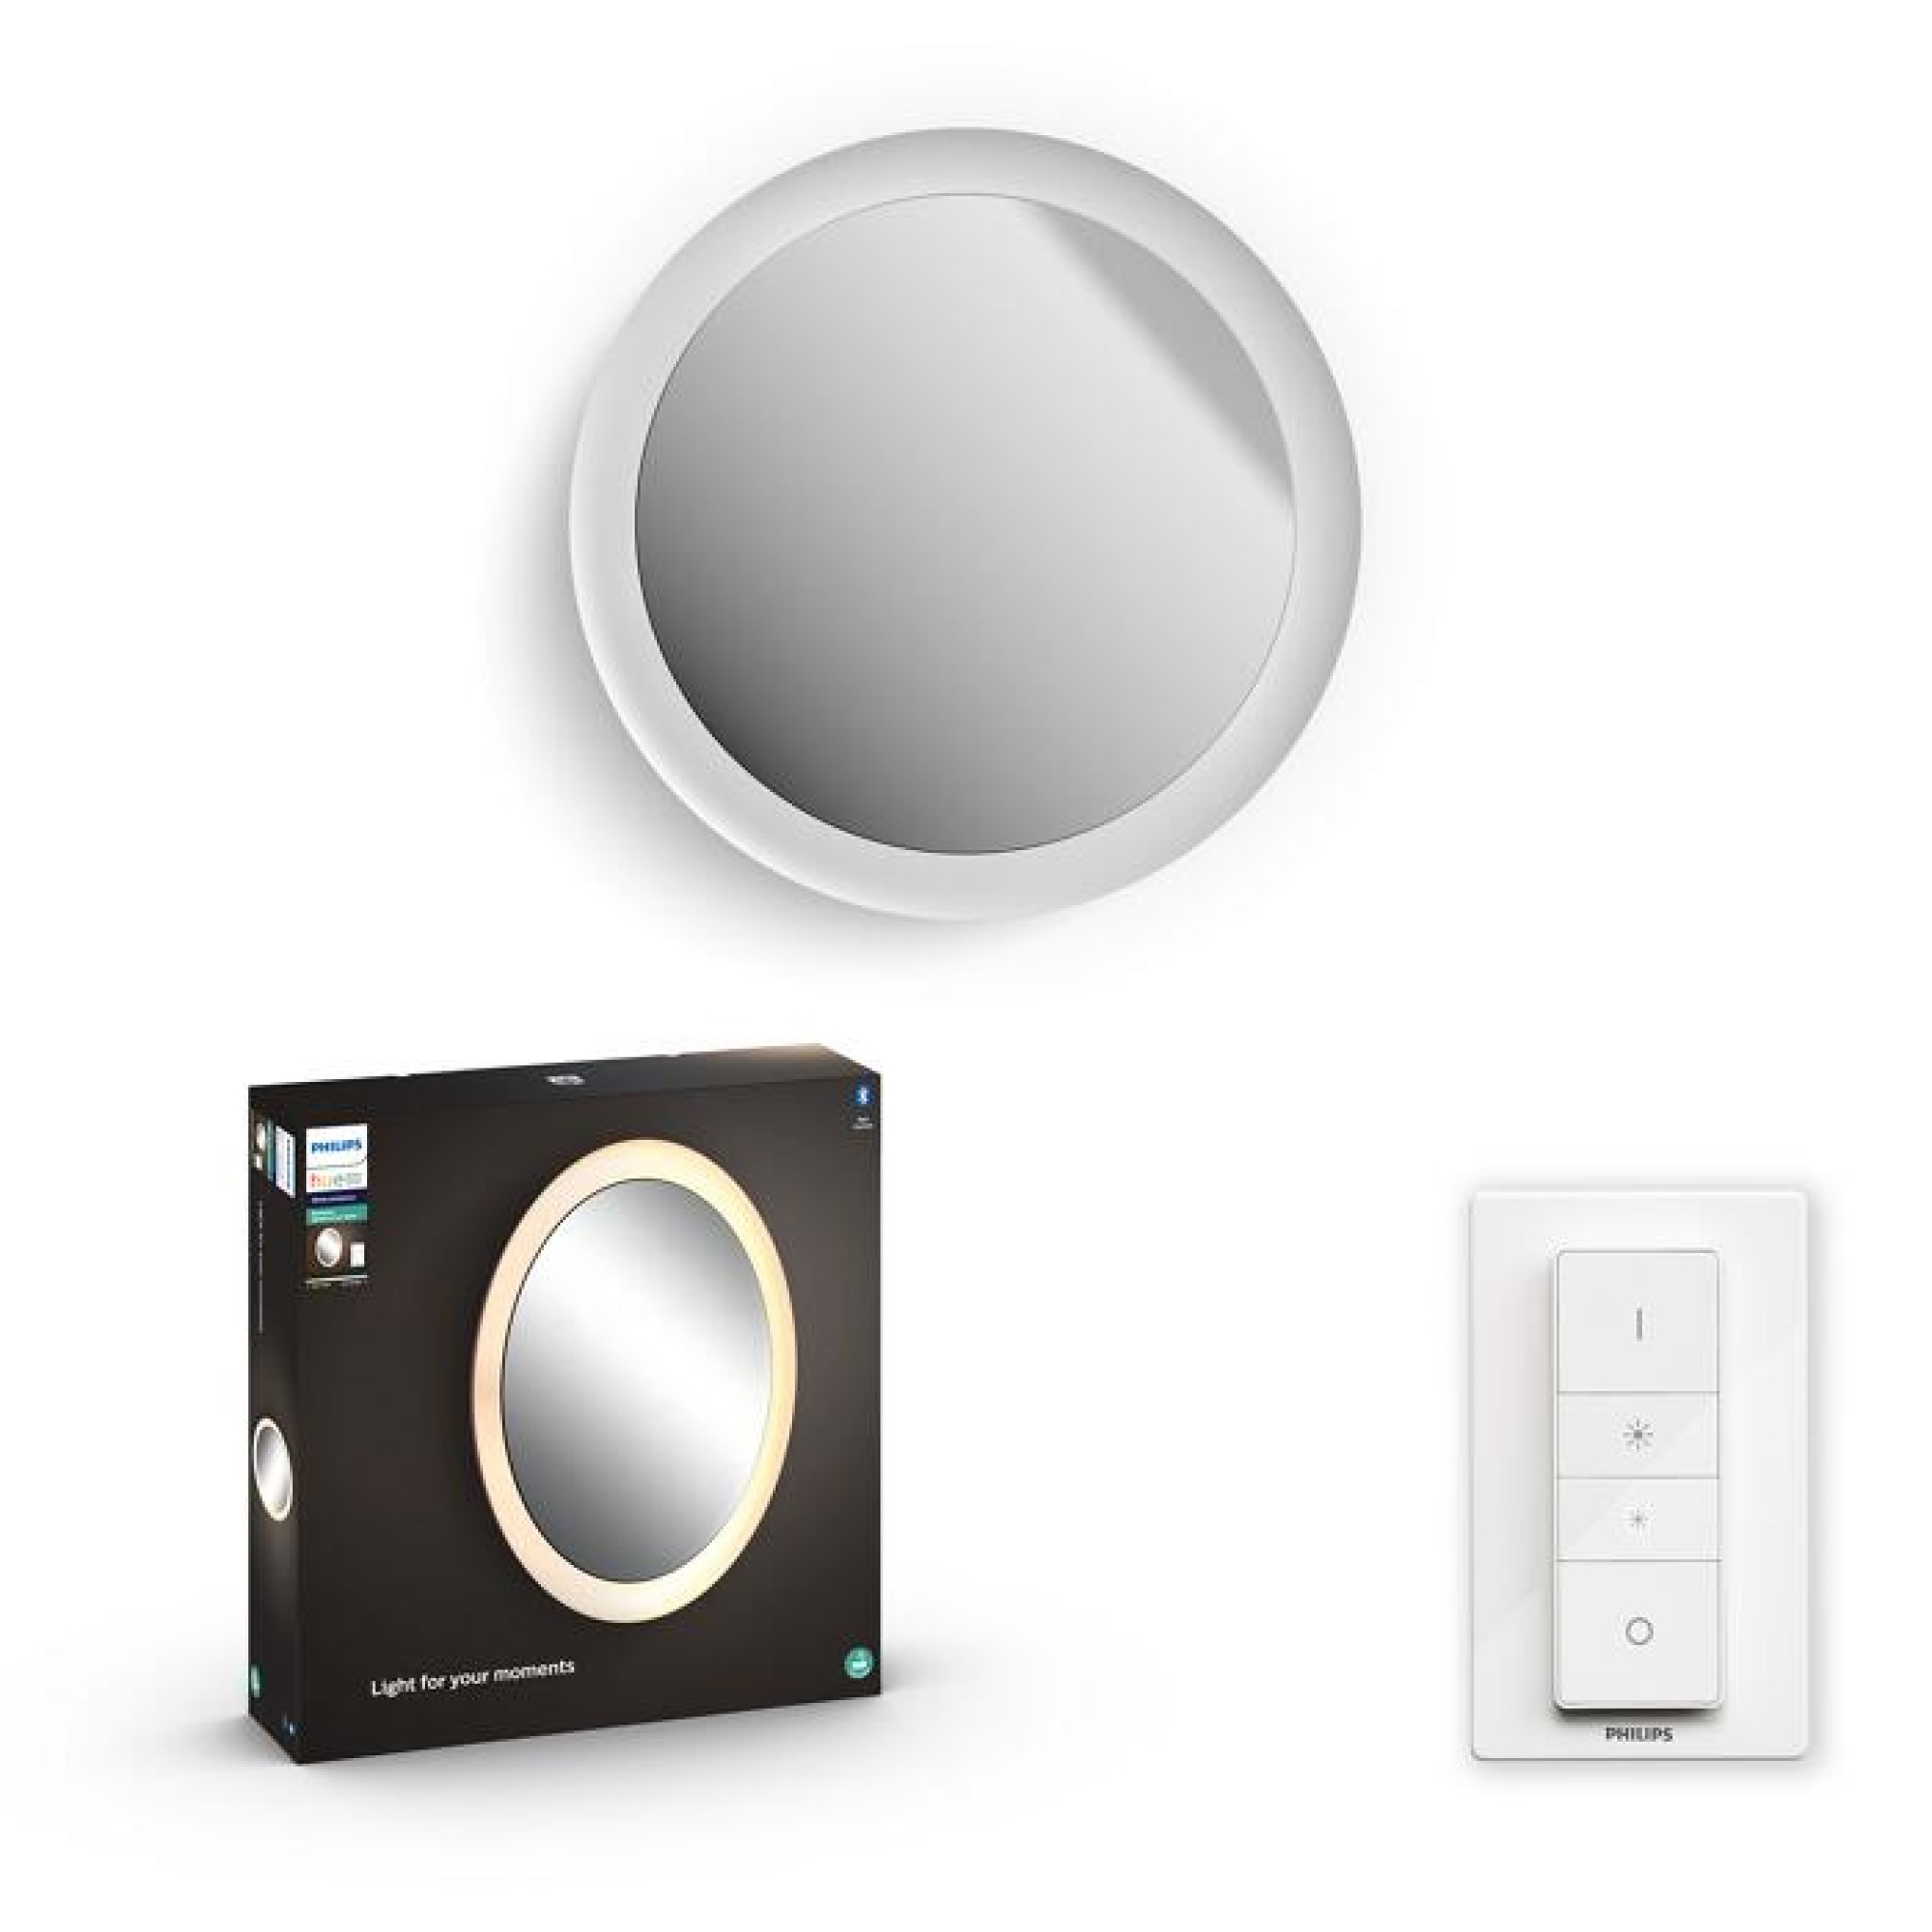 Lampa de perete Philips Hue alb Ambiance Adore LED Mirror Light alb 2550lm incl. Buton Dimmer